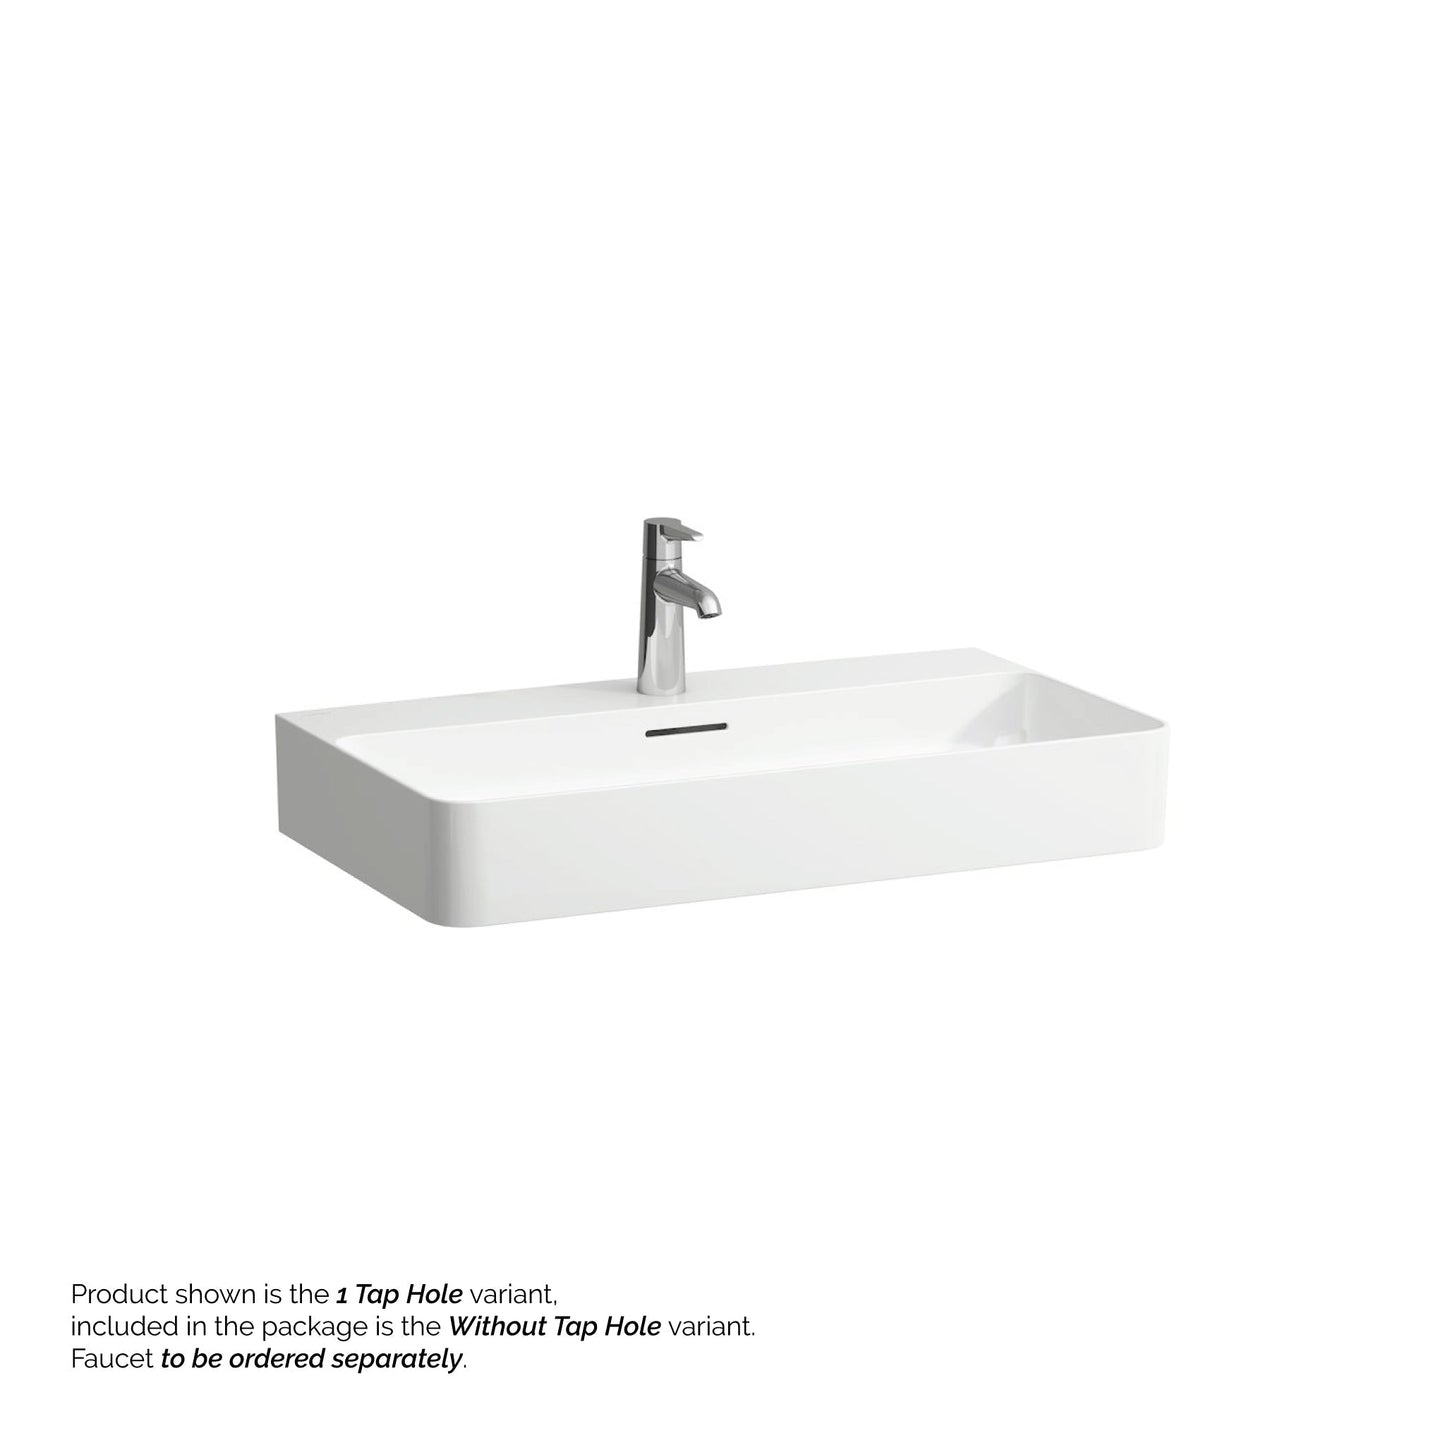 Laufen Val 30" x 17" White Ceramic Wall-Mounted Bathroom Sink Without Faucet Hole